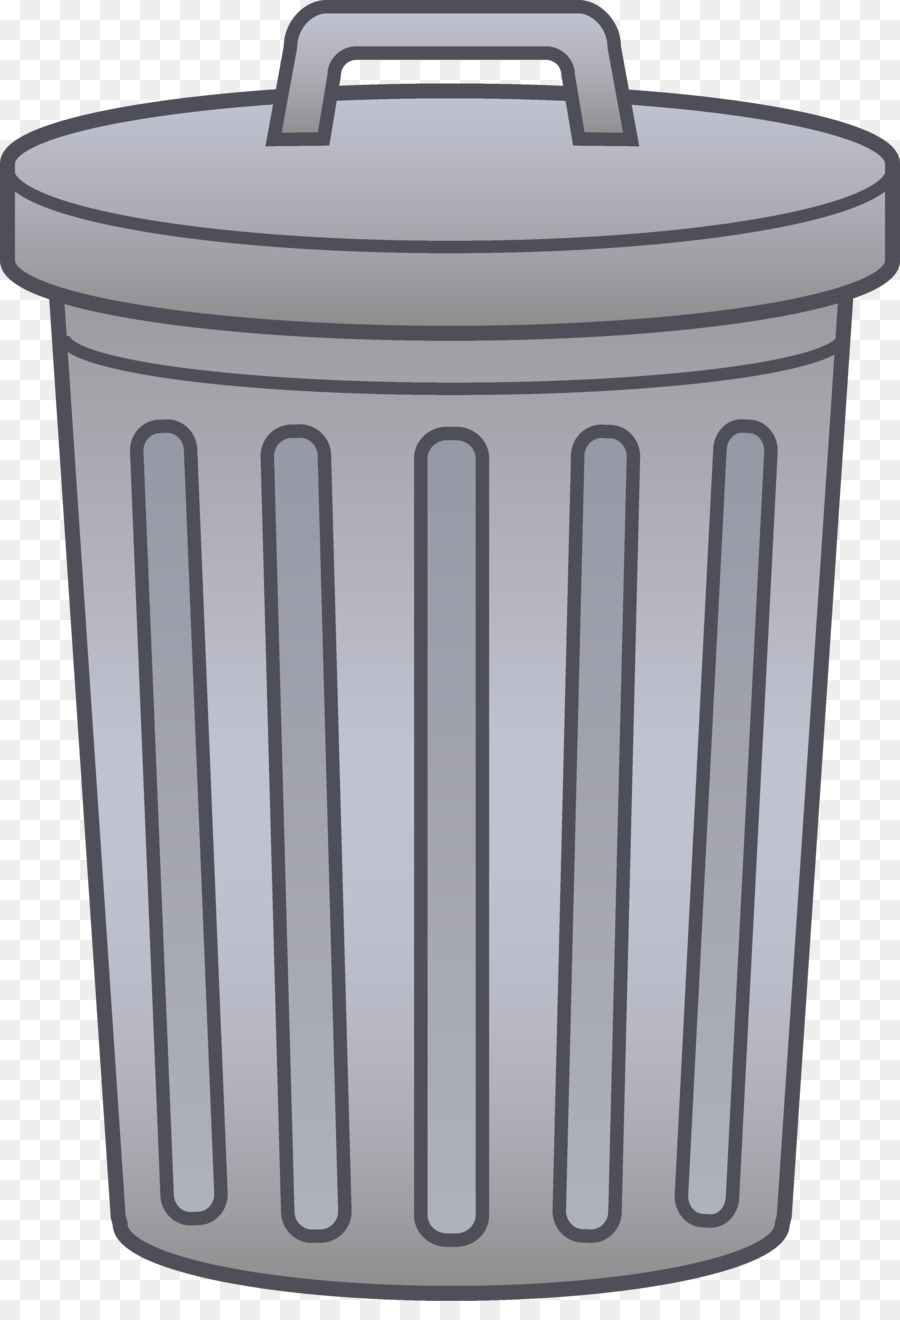 Waste container Bin bag Clip art - Trash Border Cliparts png download - 3610*5219 - Free Transparent Waste Container png Download.